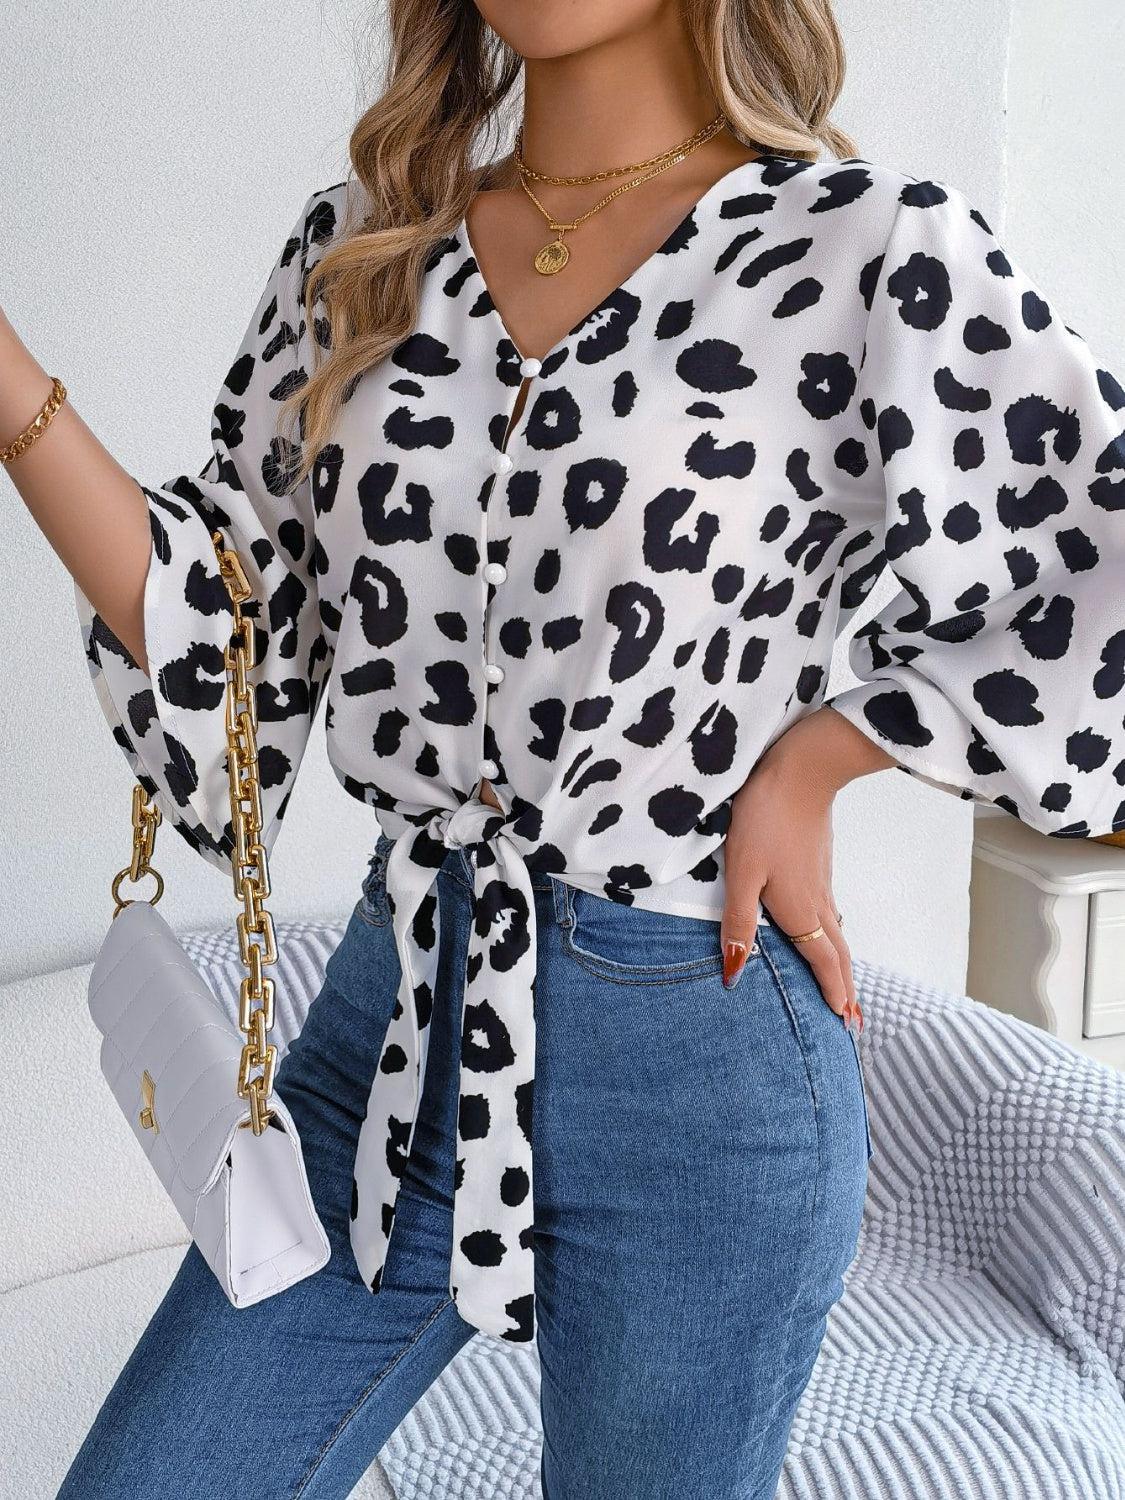 a woman wearing a leopard print blouse and jeans